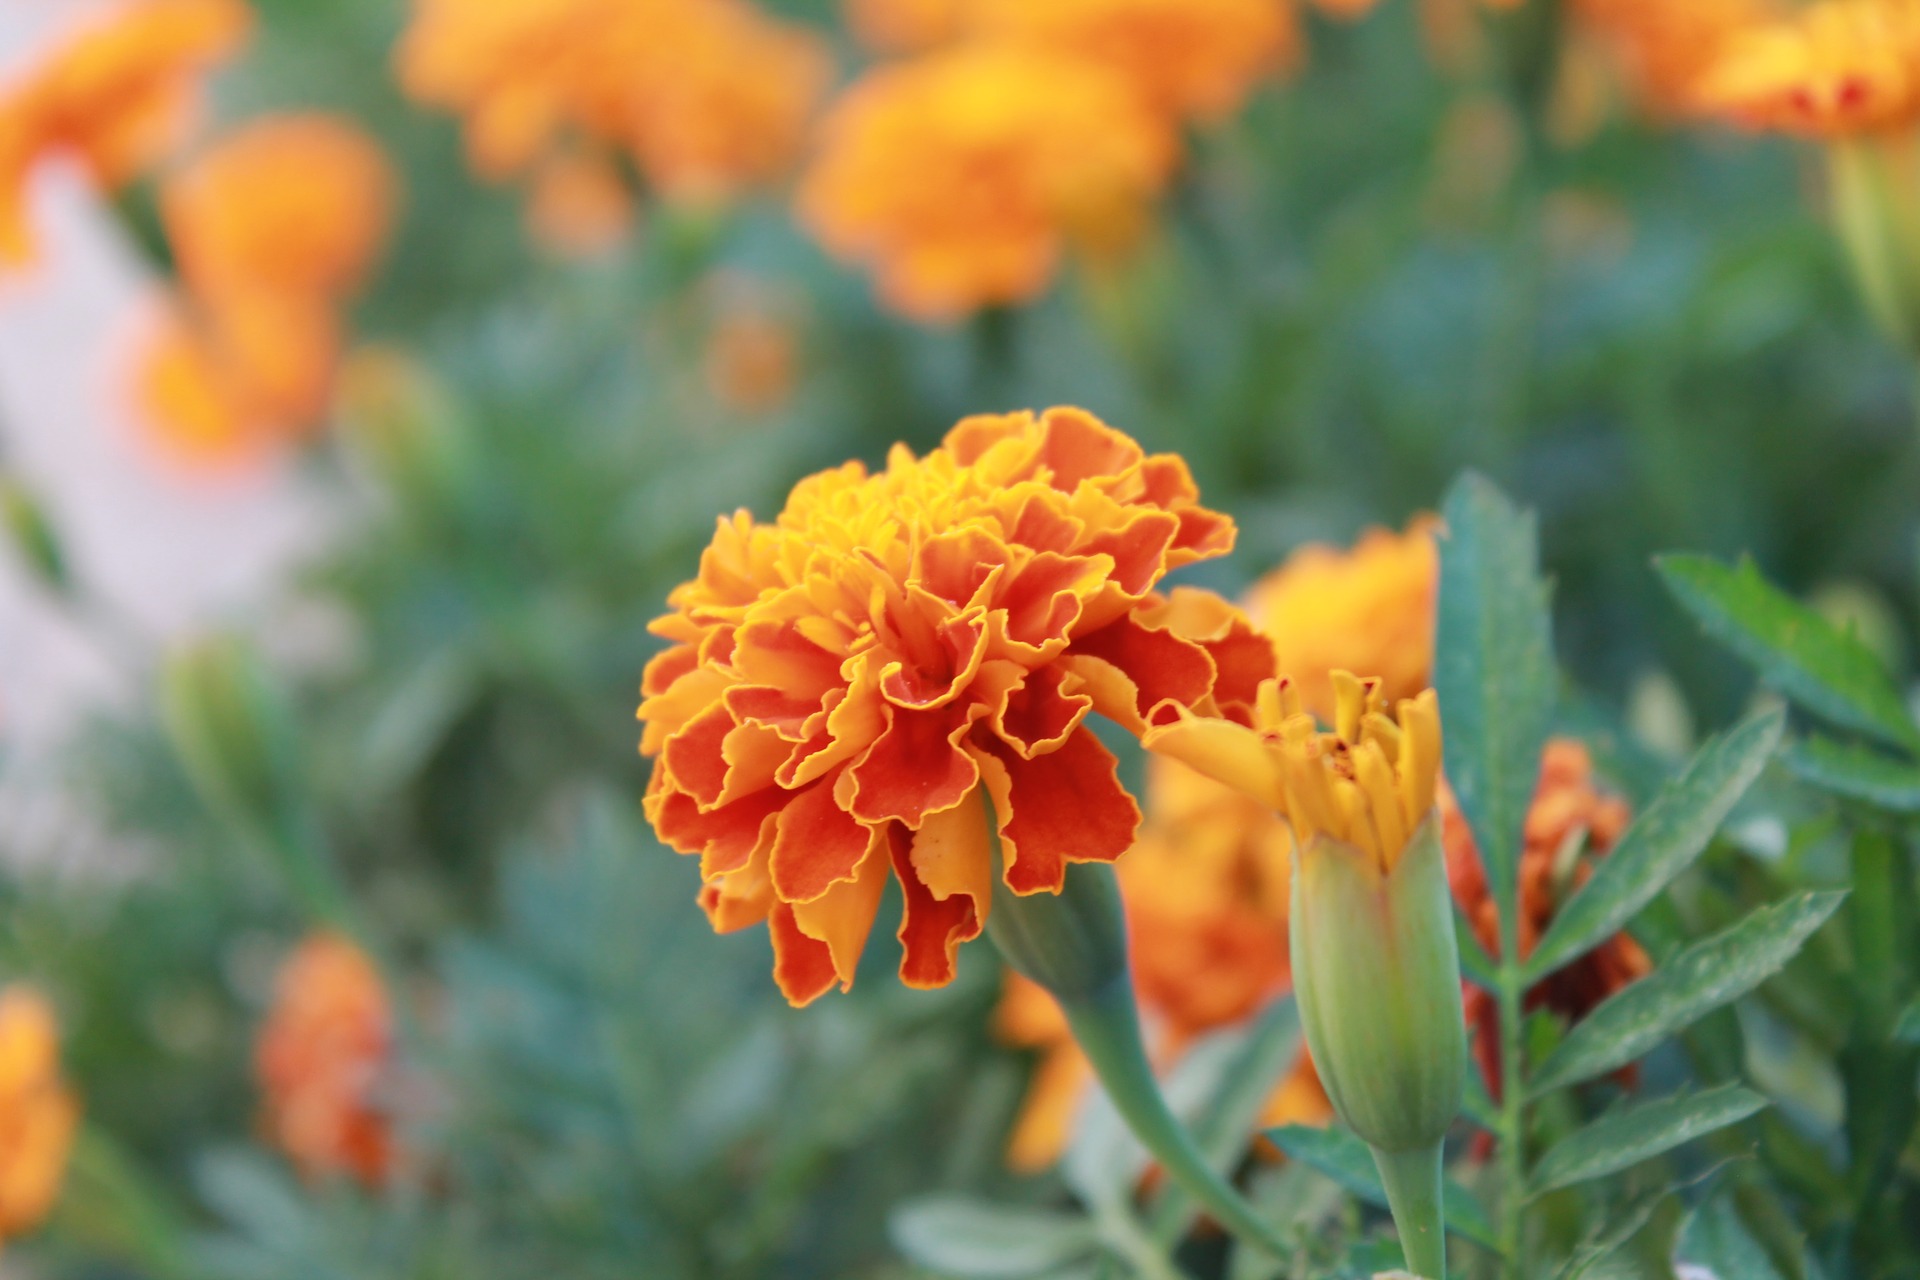 You might consider squeezing in some space to grow some of these flowers in your vegetable garden. They will add some color and help your plants thrive!